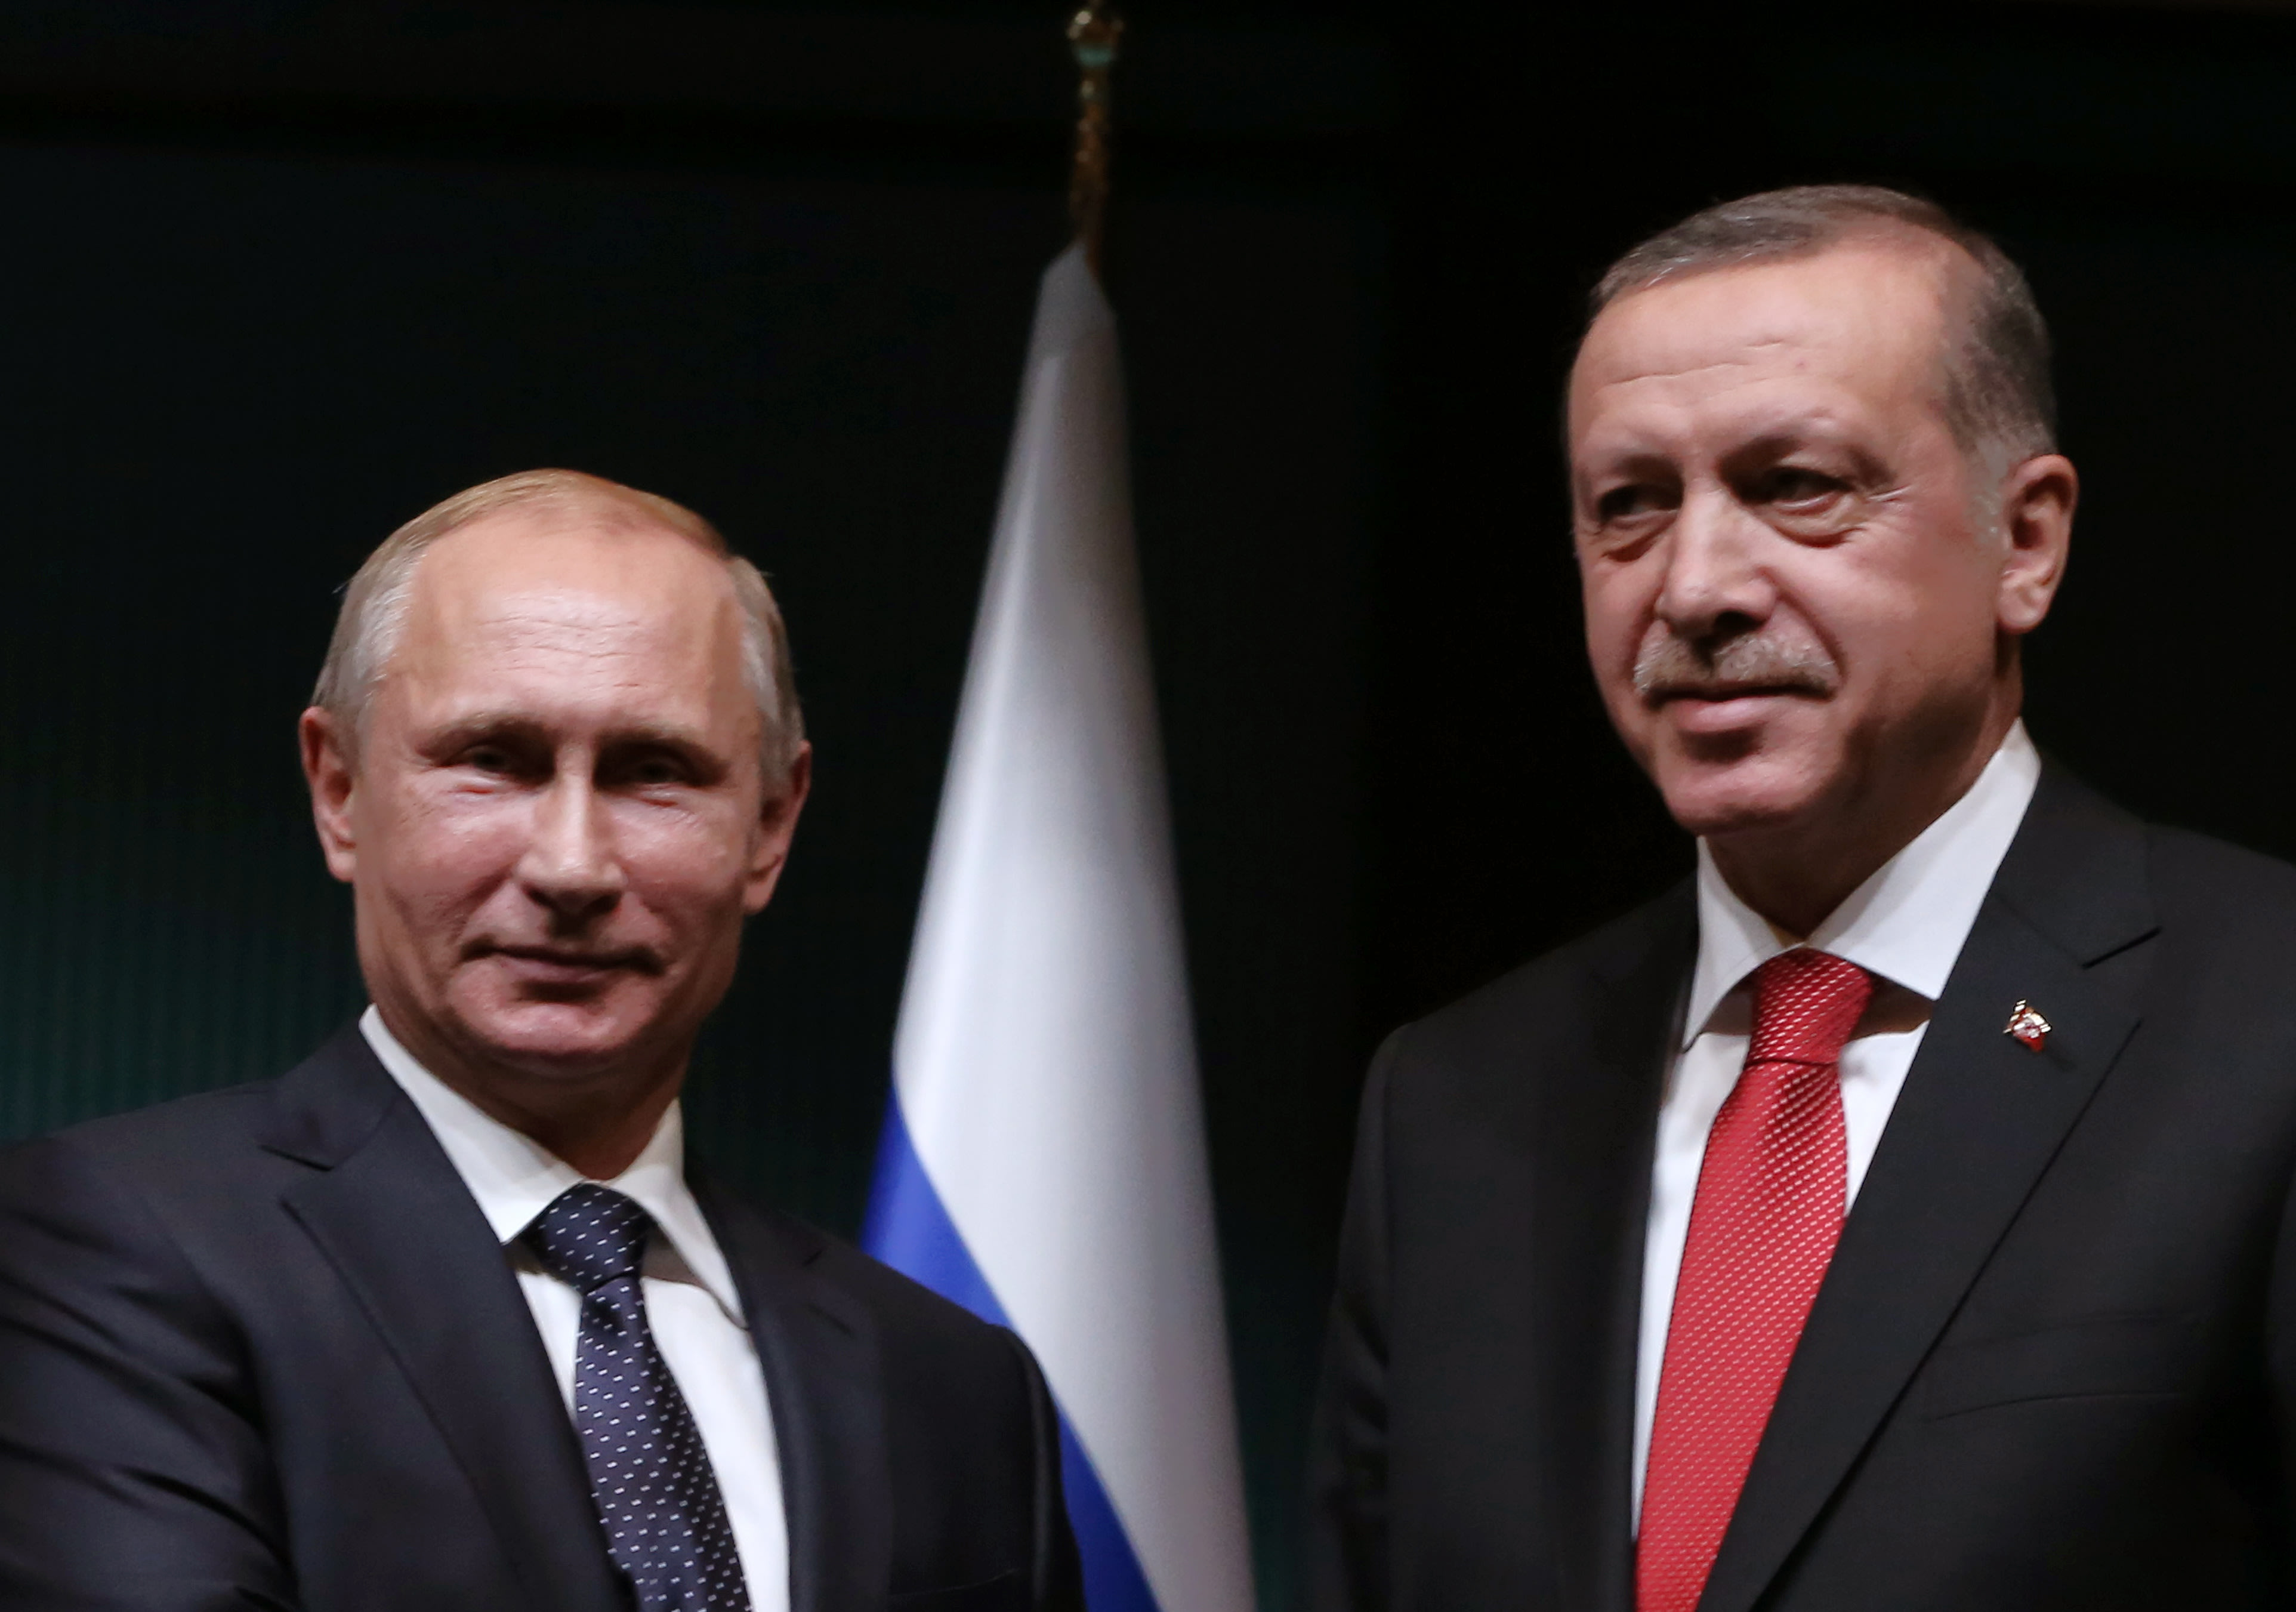 'Shut out': Turkey finds itself 'in a very difficult position' with the Russian moves in Syria